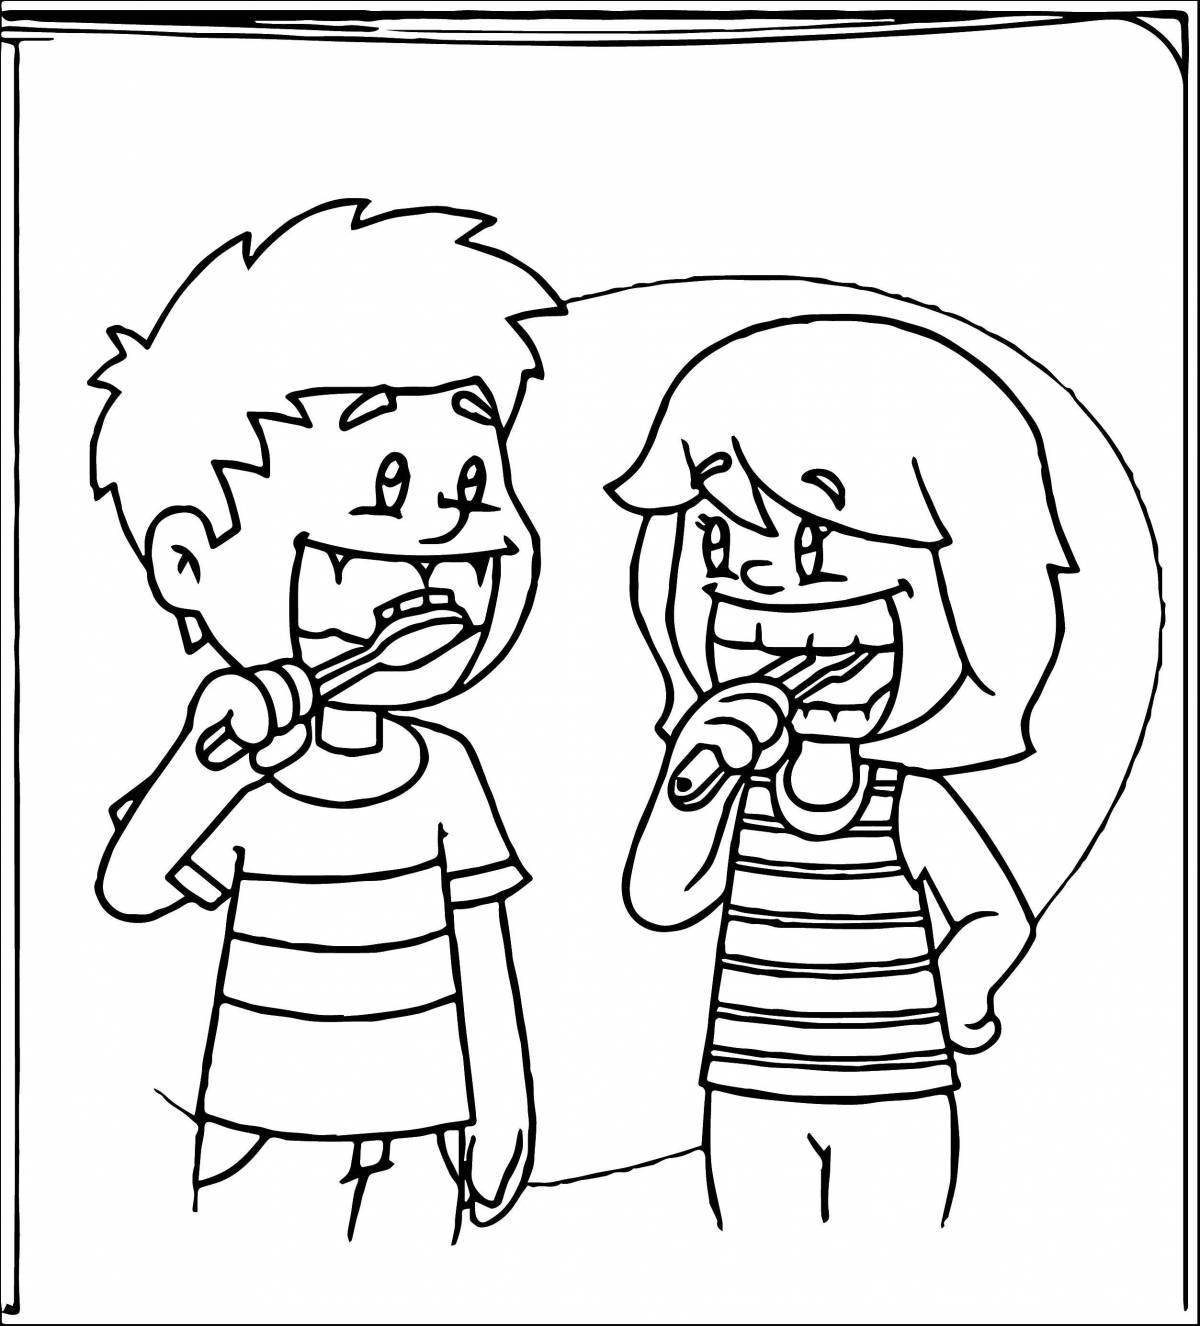 Brush your teeth coloring book